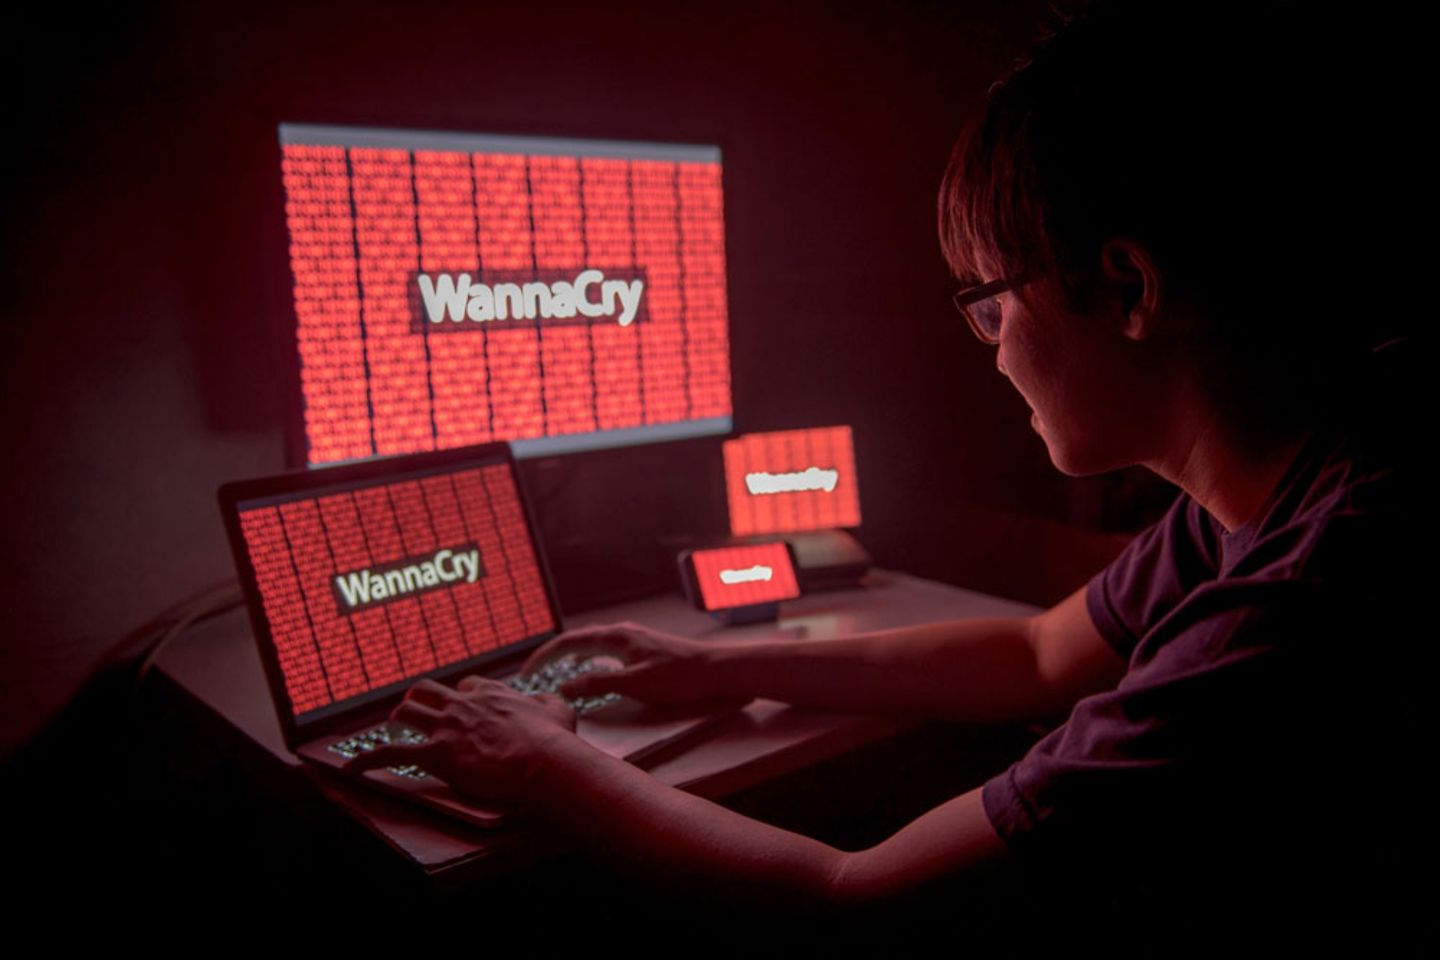 Worker frustrated and confused by WannaCry ransomware attack on desktop screen